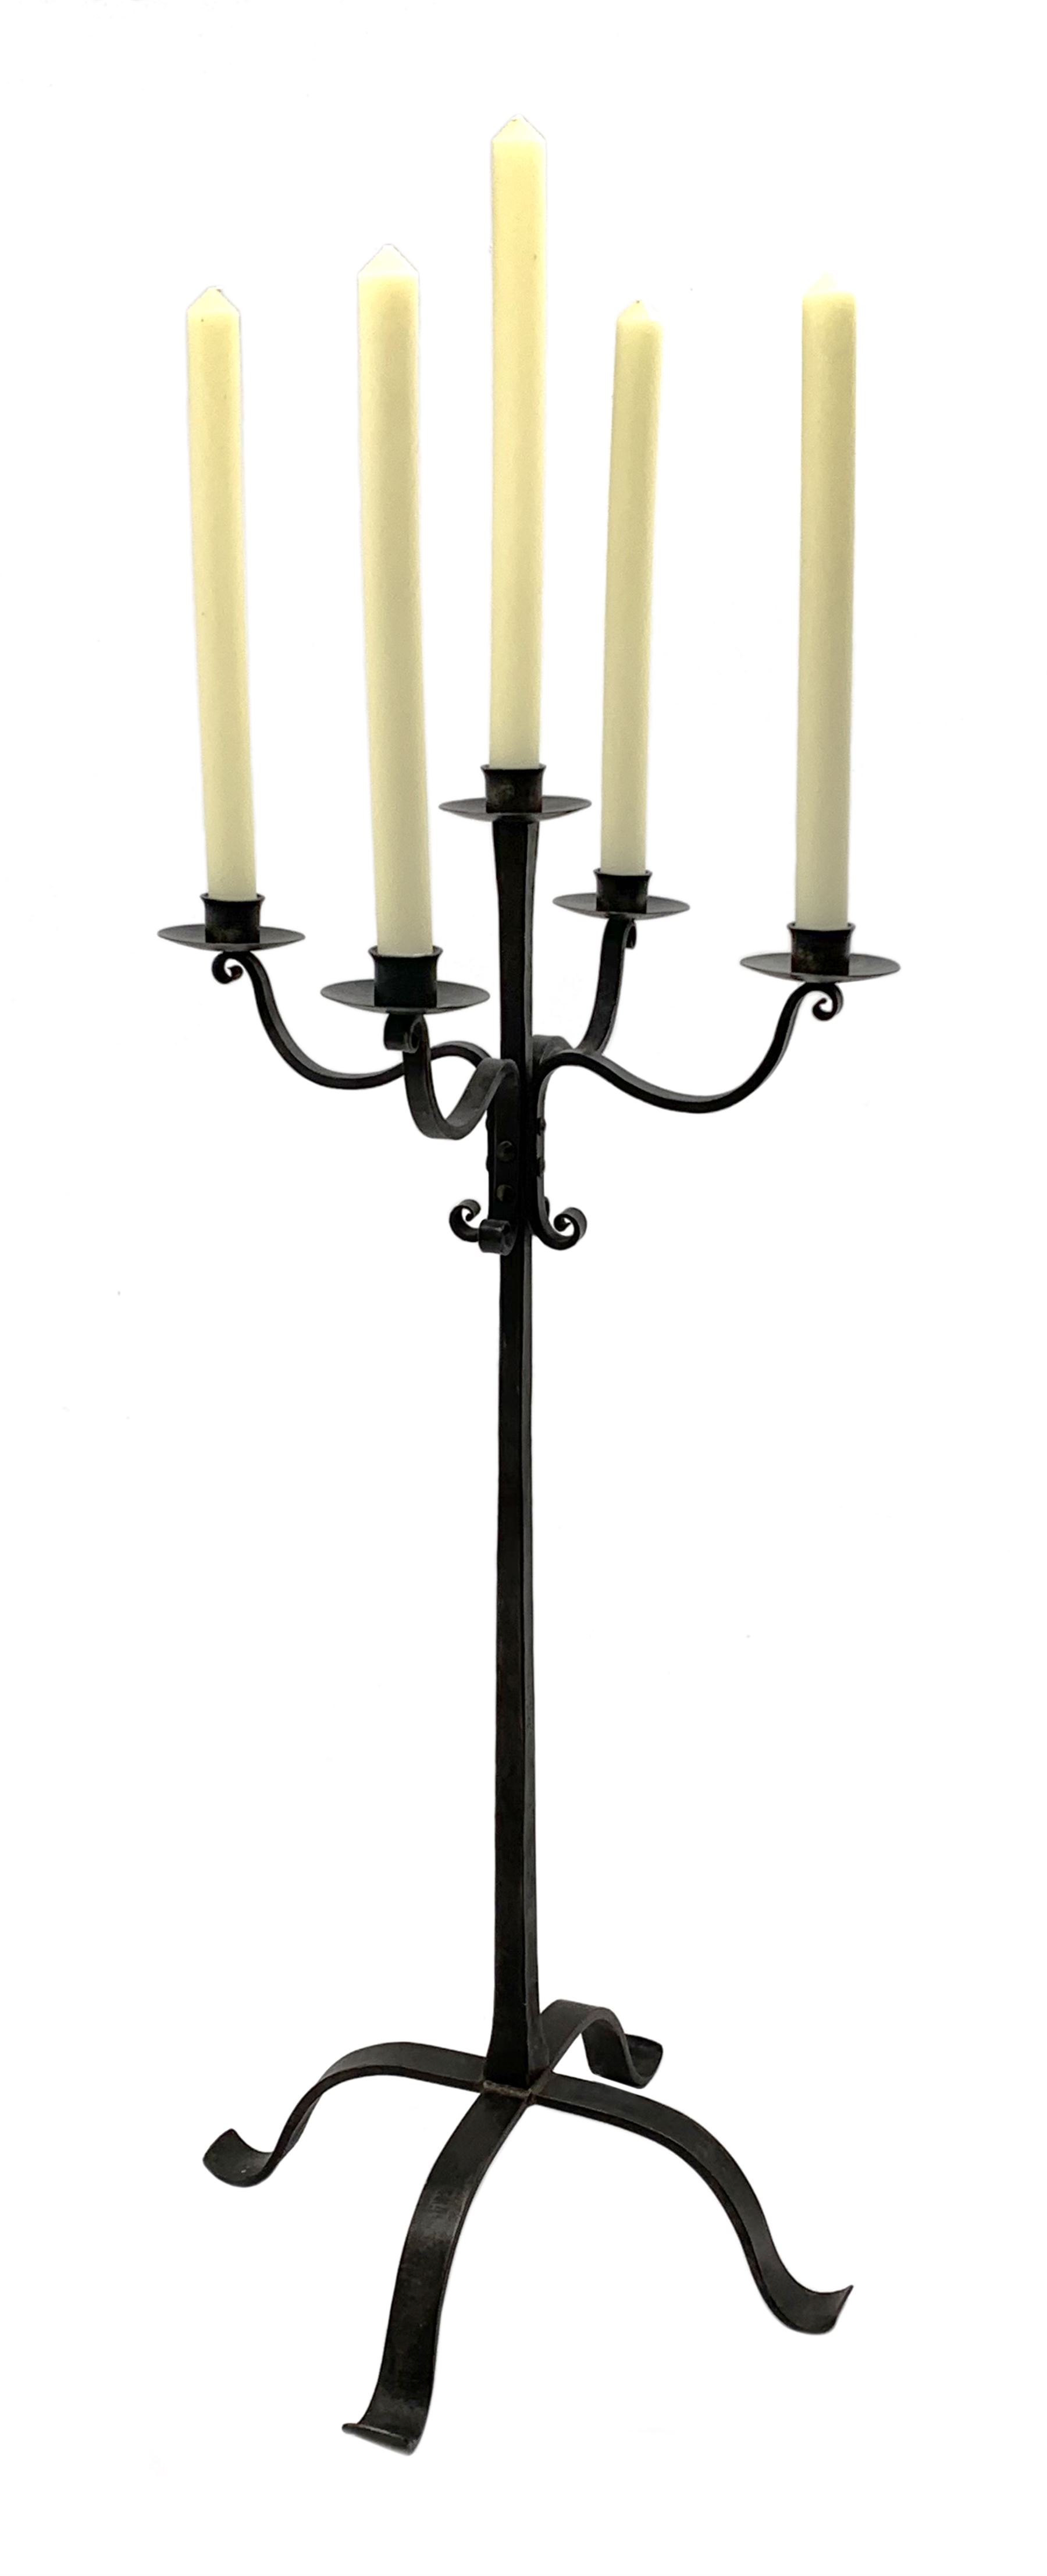 Wrought hand forged iron candle stand, four scrolled branches and central vertical branch with sconc